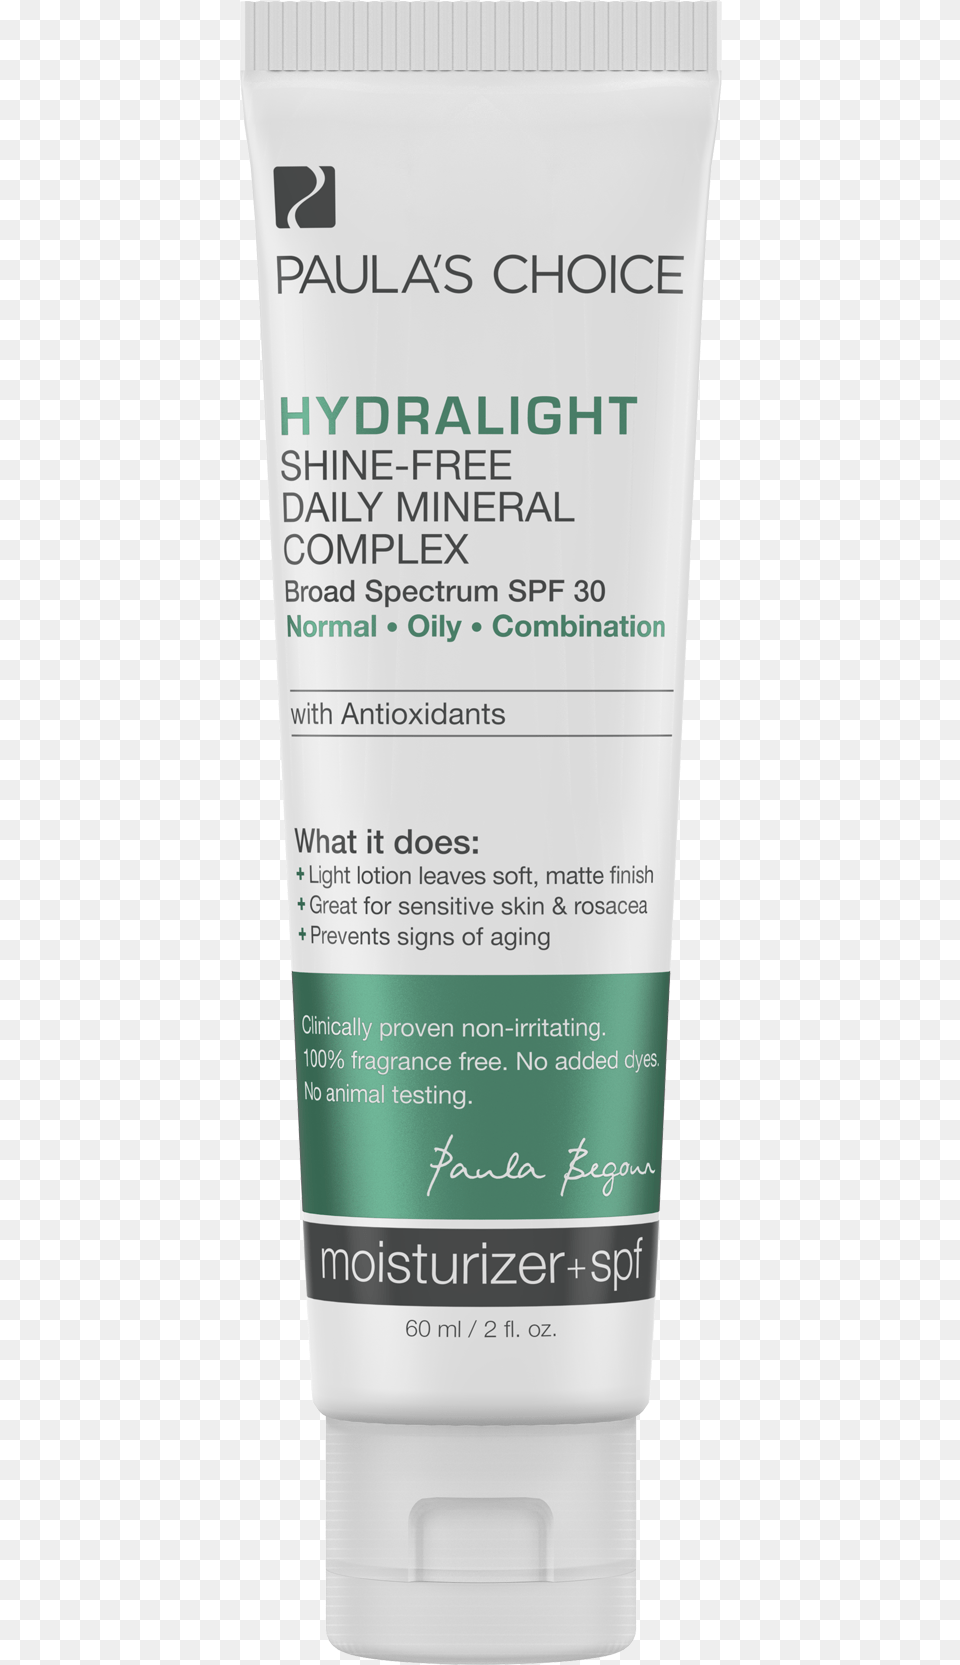 Choice Hydralight, Bottle, Cosmetics, Sunscreen Png Image